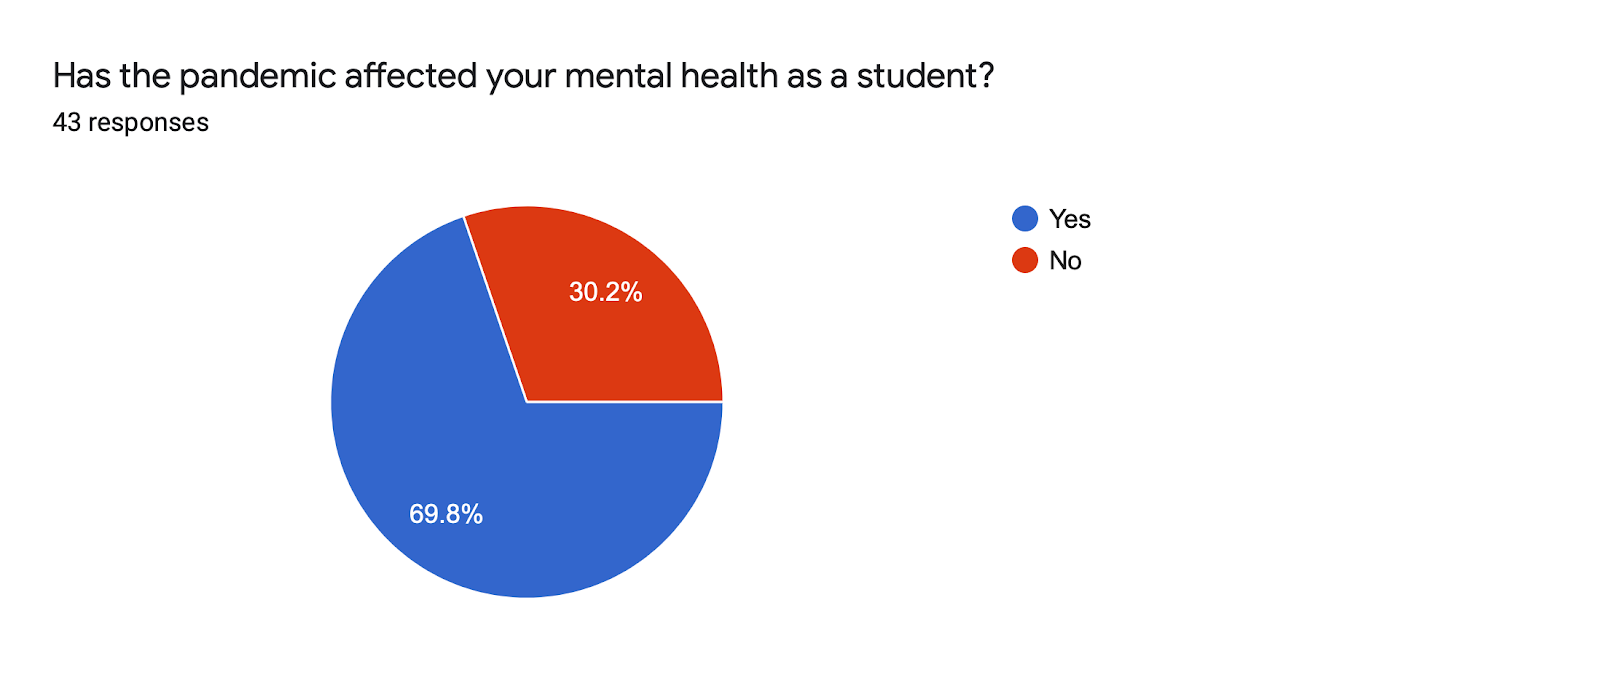 Forms response chart. Question title: Has the pandemic affected your mental health as a student?. Number of responses: 43 responses.